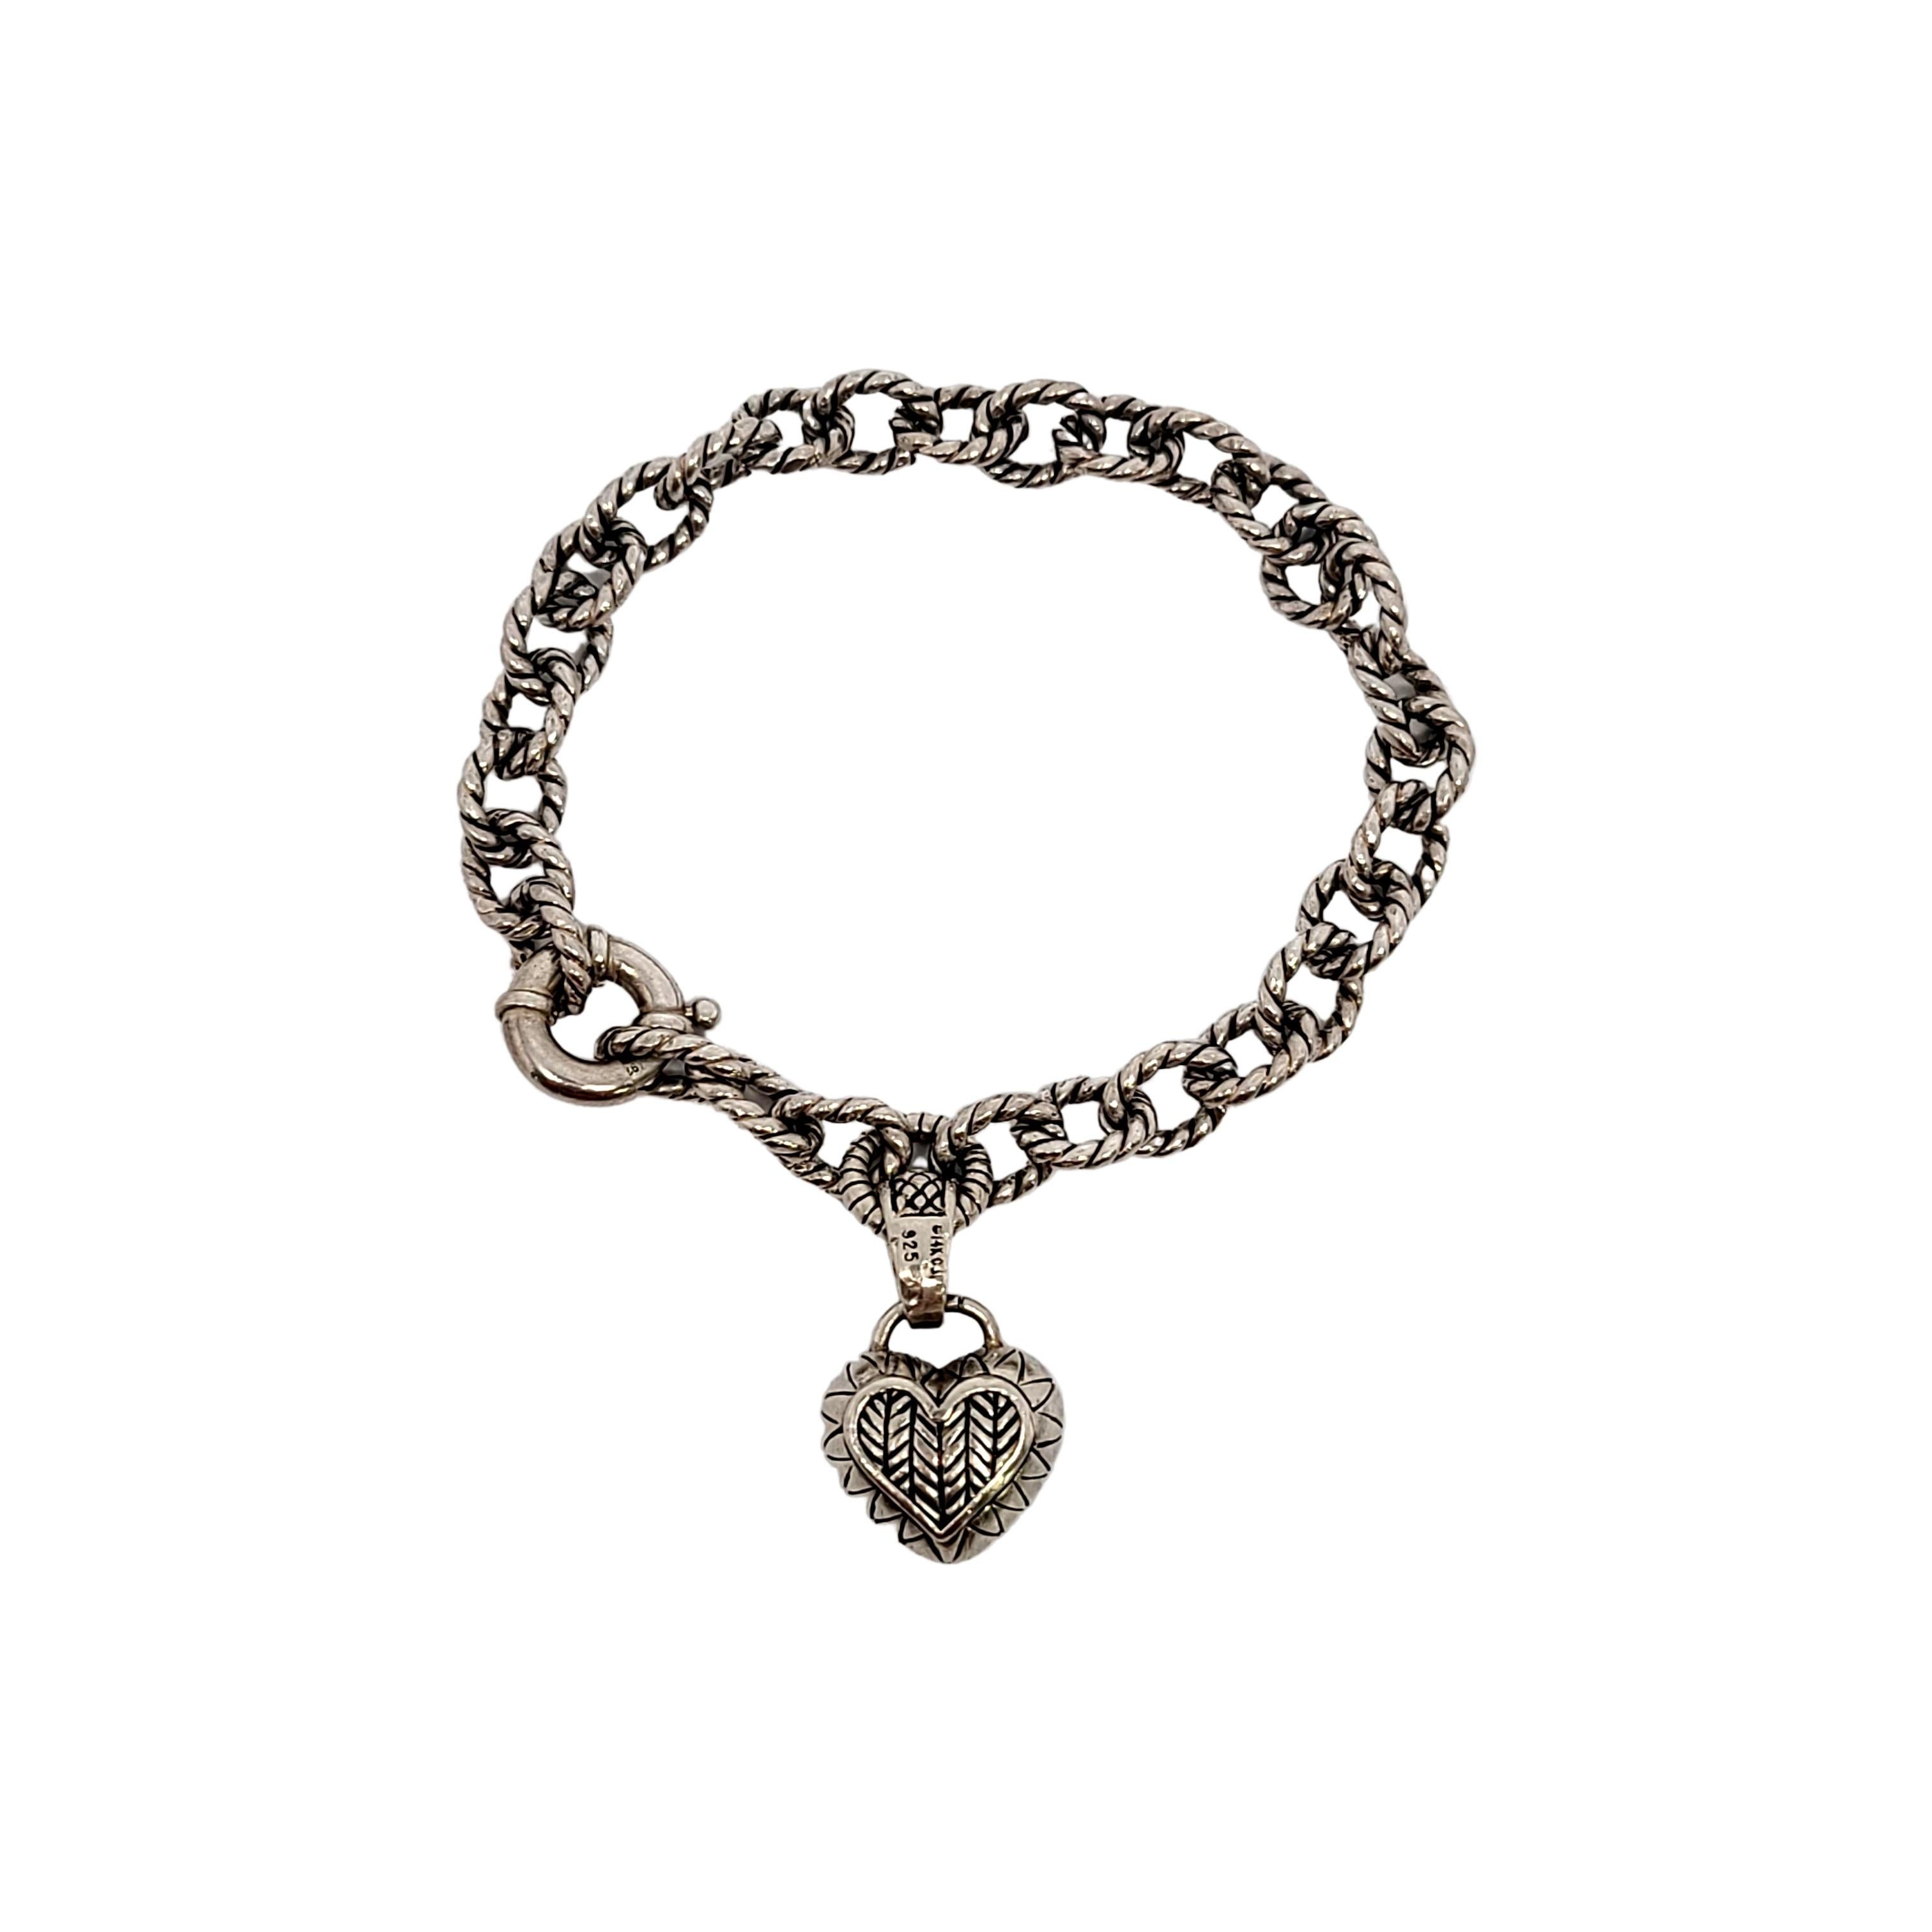 Sterling silver textured link charm bracelet with sterling silver heart dangle with 14K yellow gold and diamond accents by designer Andrea Candela of Spain.

This beautiful piece features rope textured links. The heart dangle features a chevron